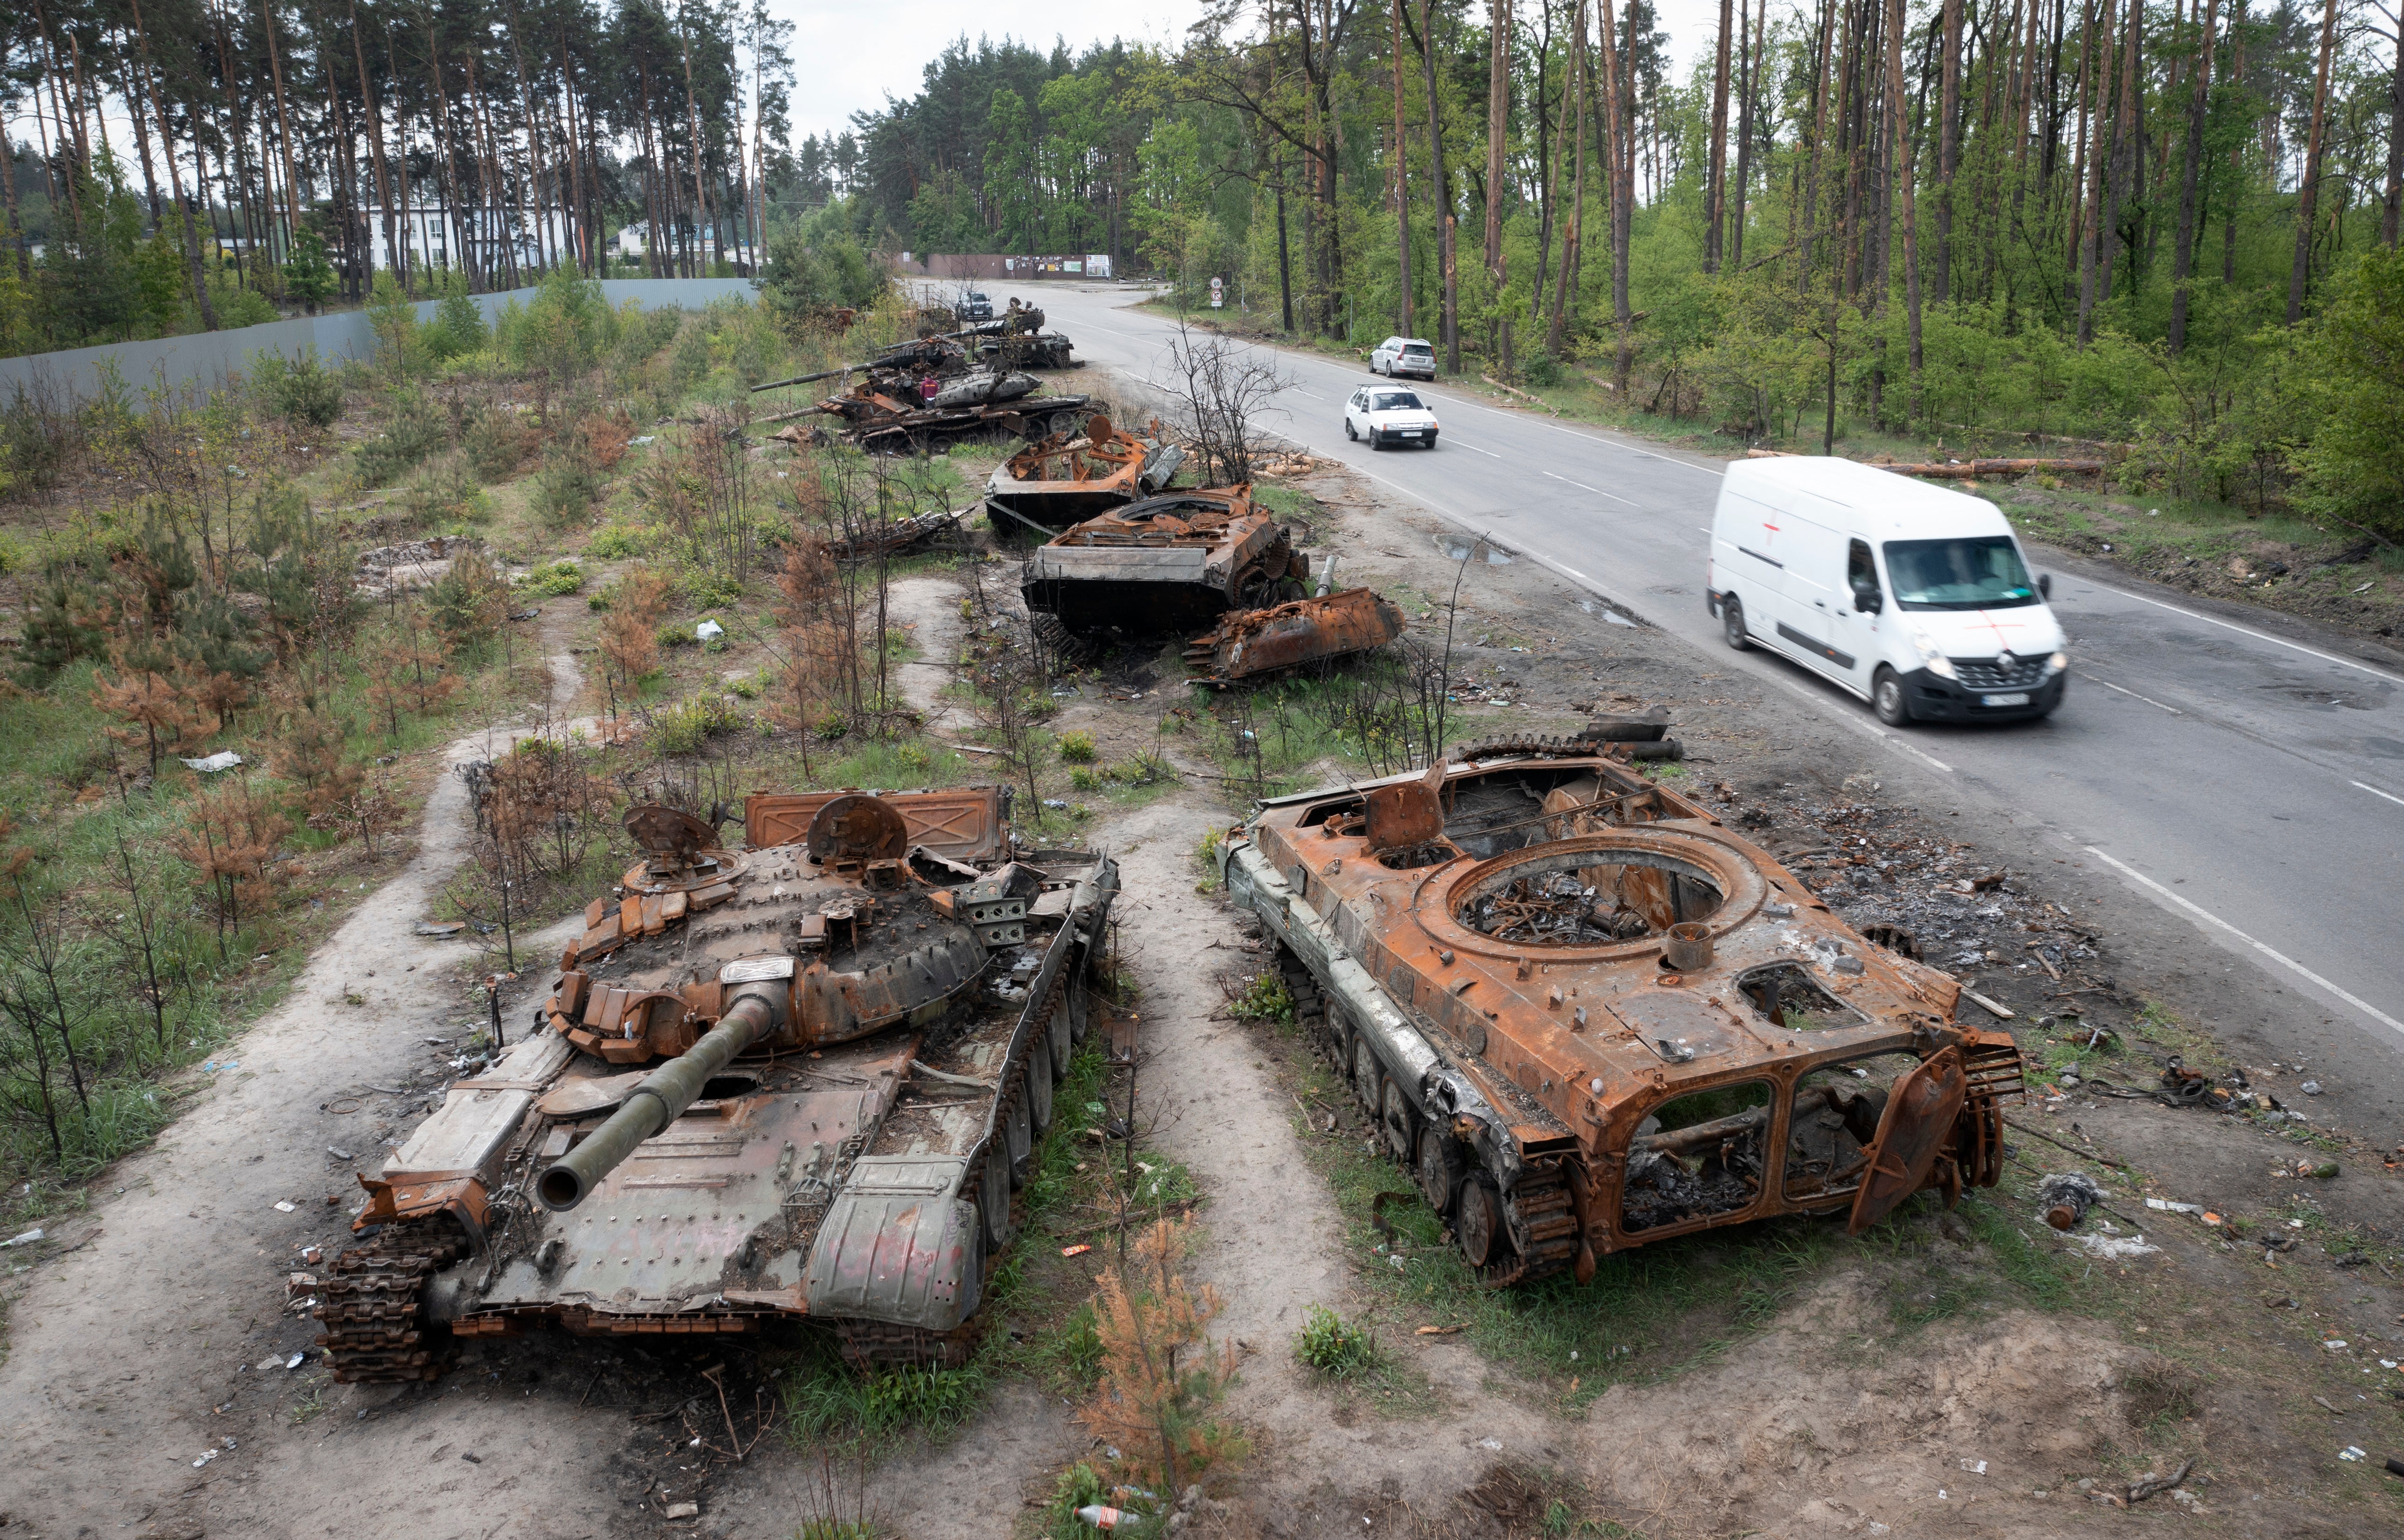 Cars pass by destroyed Russian tanks in a recent battle against Ukrainians in the village of Dmytrivka, close to Kyiv, Ukraine, Monday, May 23, 2022. (AP Photo/Efrem Lukatsky)